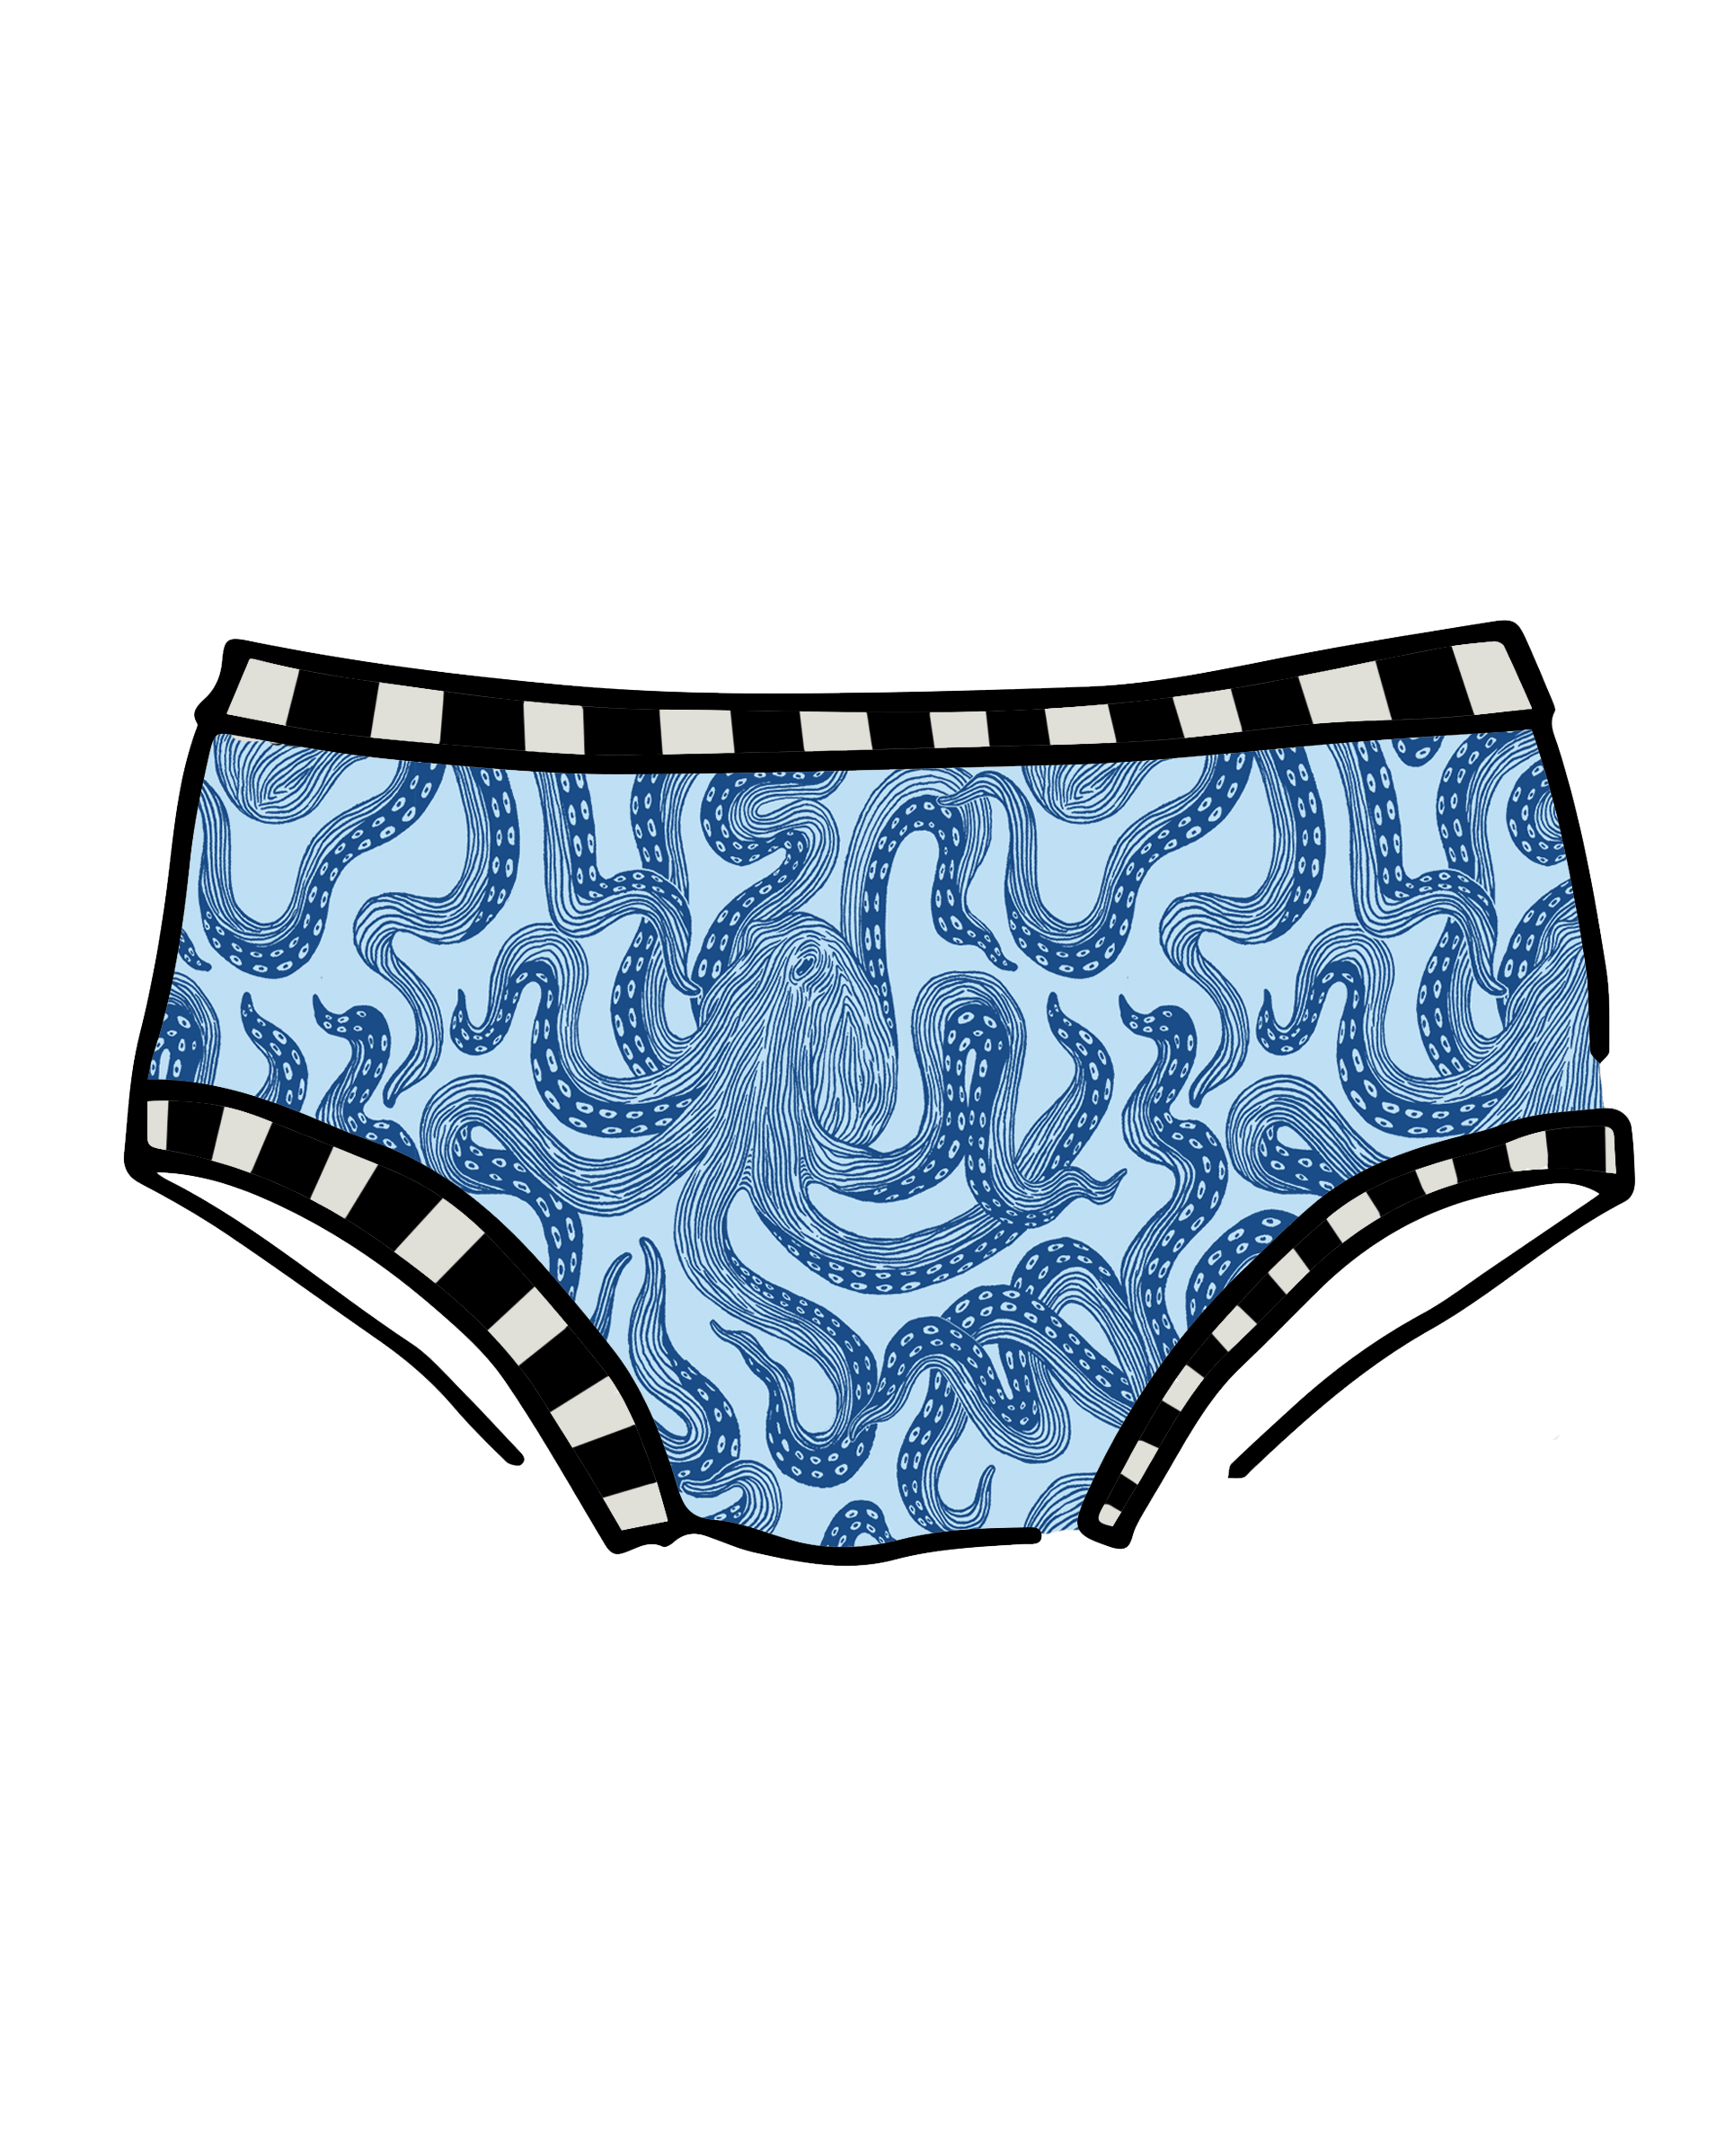 Drawing of Thunderpants Hipster style underwear in Octo-Pants print - dark blue octopus on light blue fabric.